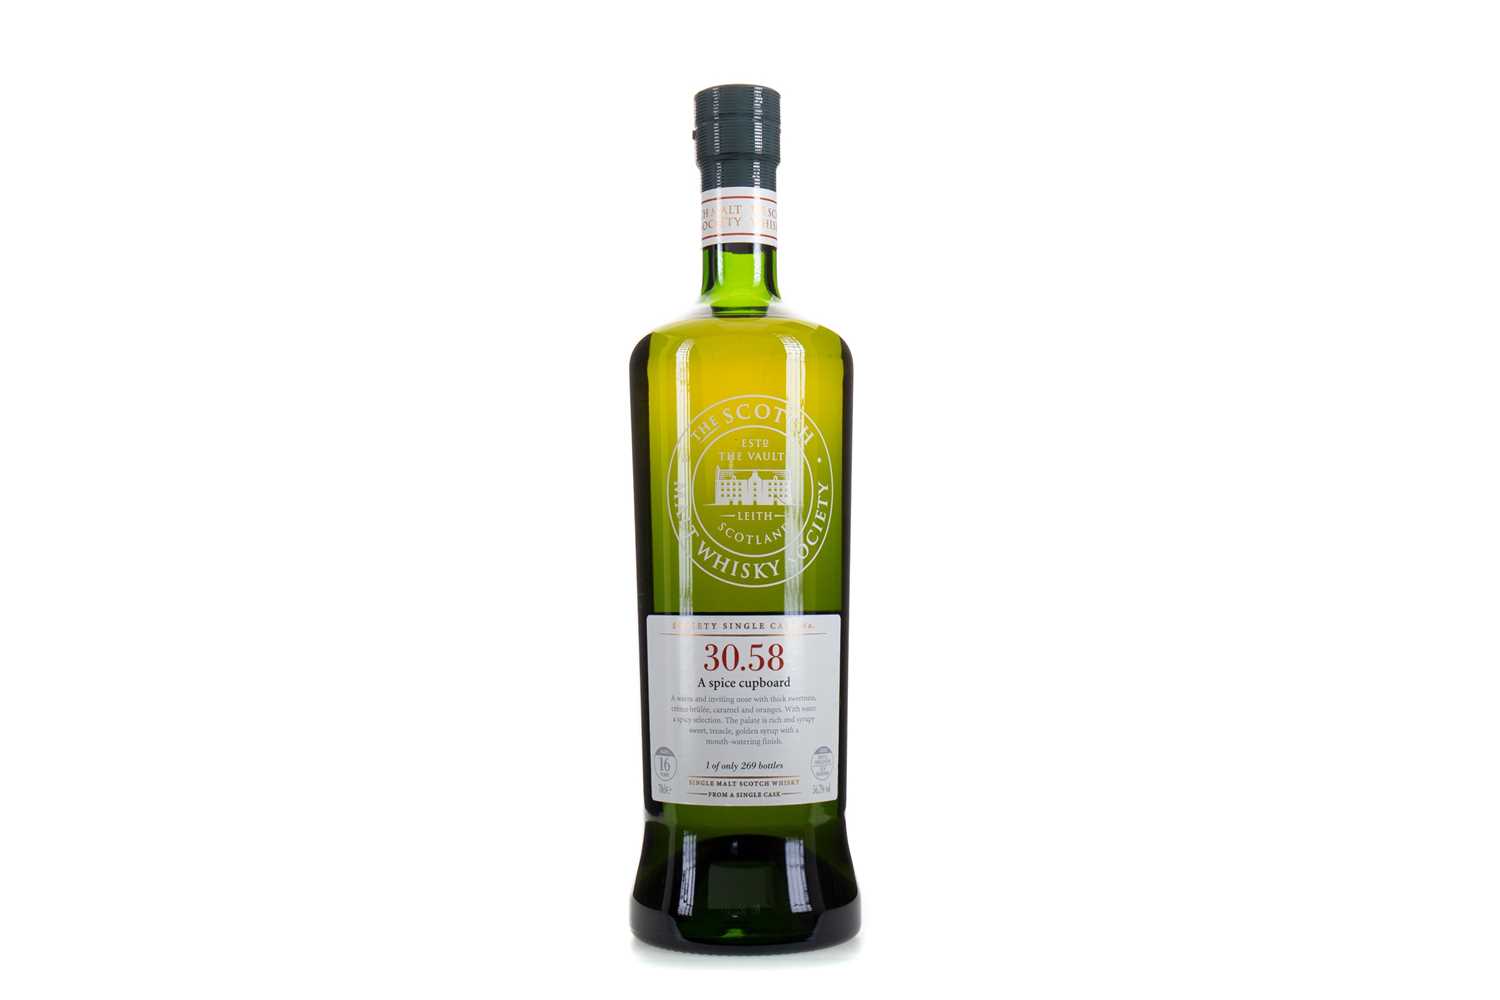 Lot 504 - SMWS 30.58 GLENROTHES 16 YEAR OLD